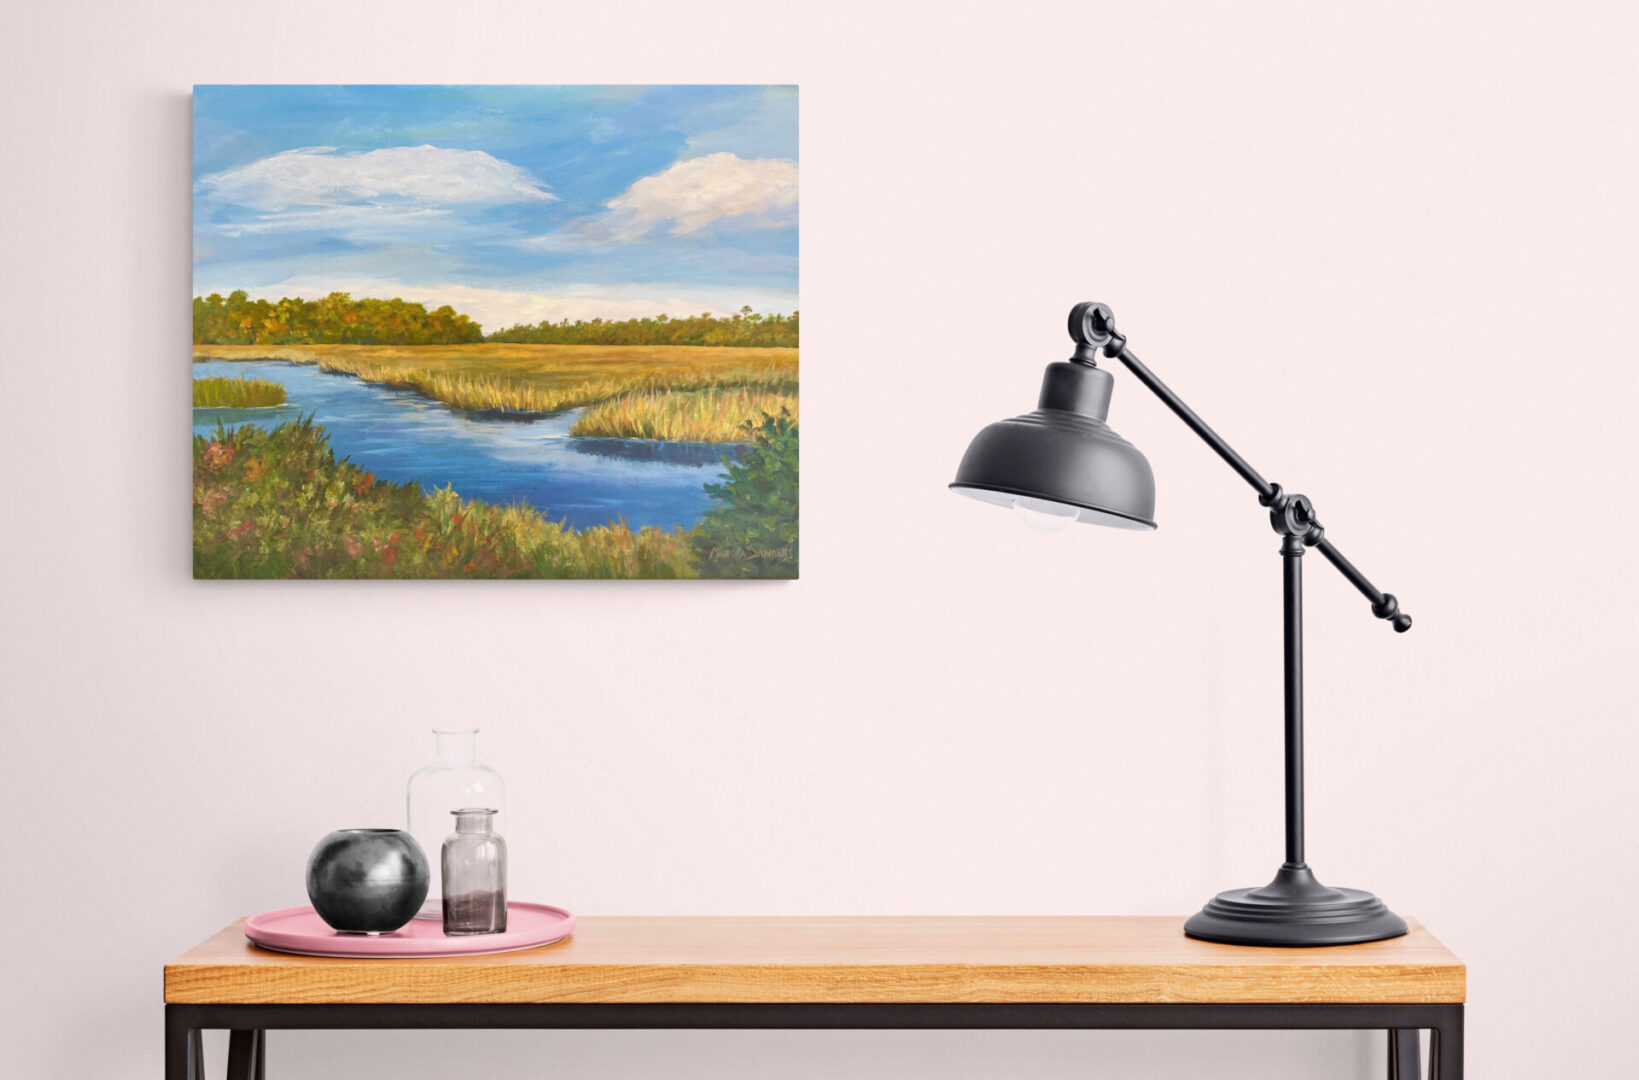 Local Fine Art For Sale: A mesmerizing painting capturing the serene beauty of a marsh. The artwork also features an eye-catching lamp delicately placed on a table, enhancing the overall ambiance and adding a